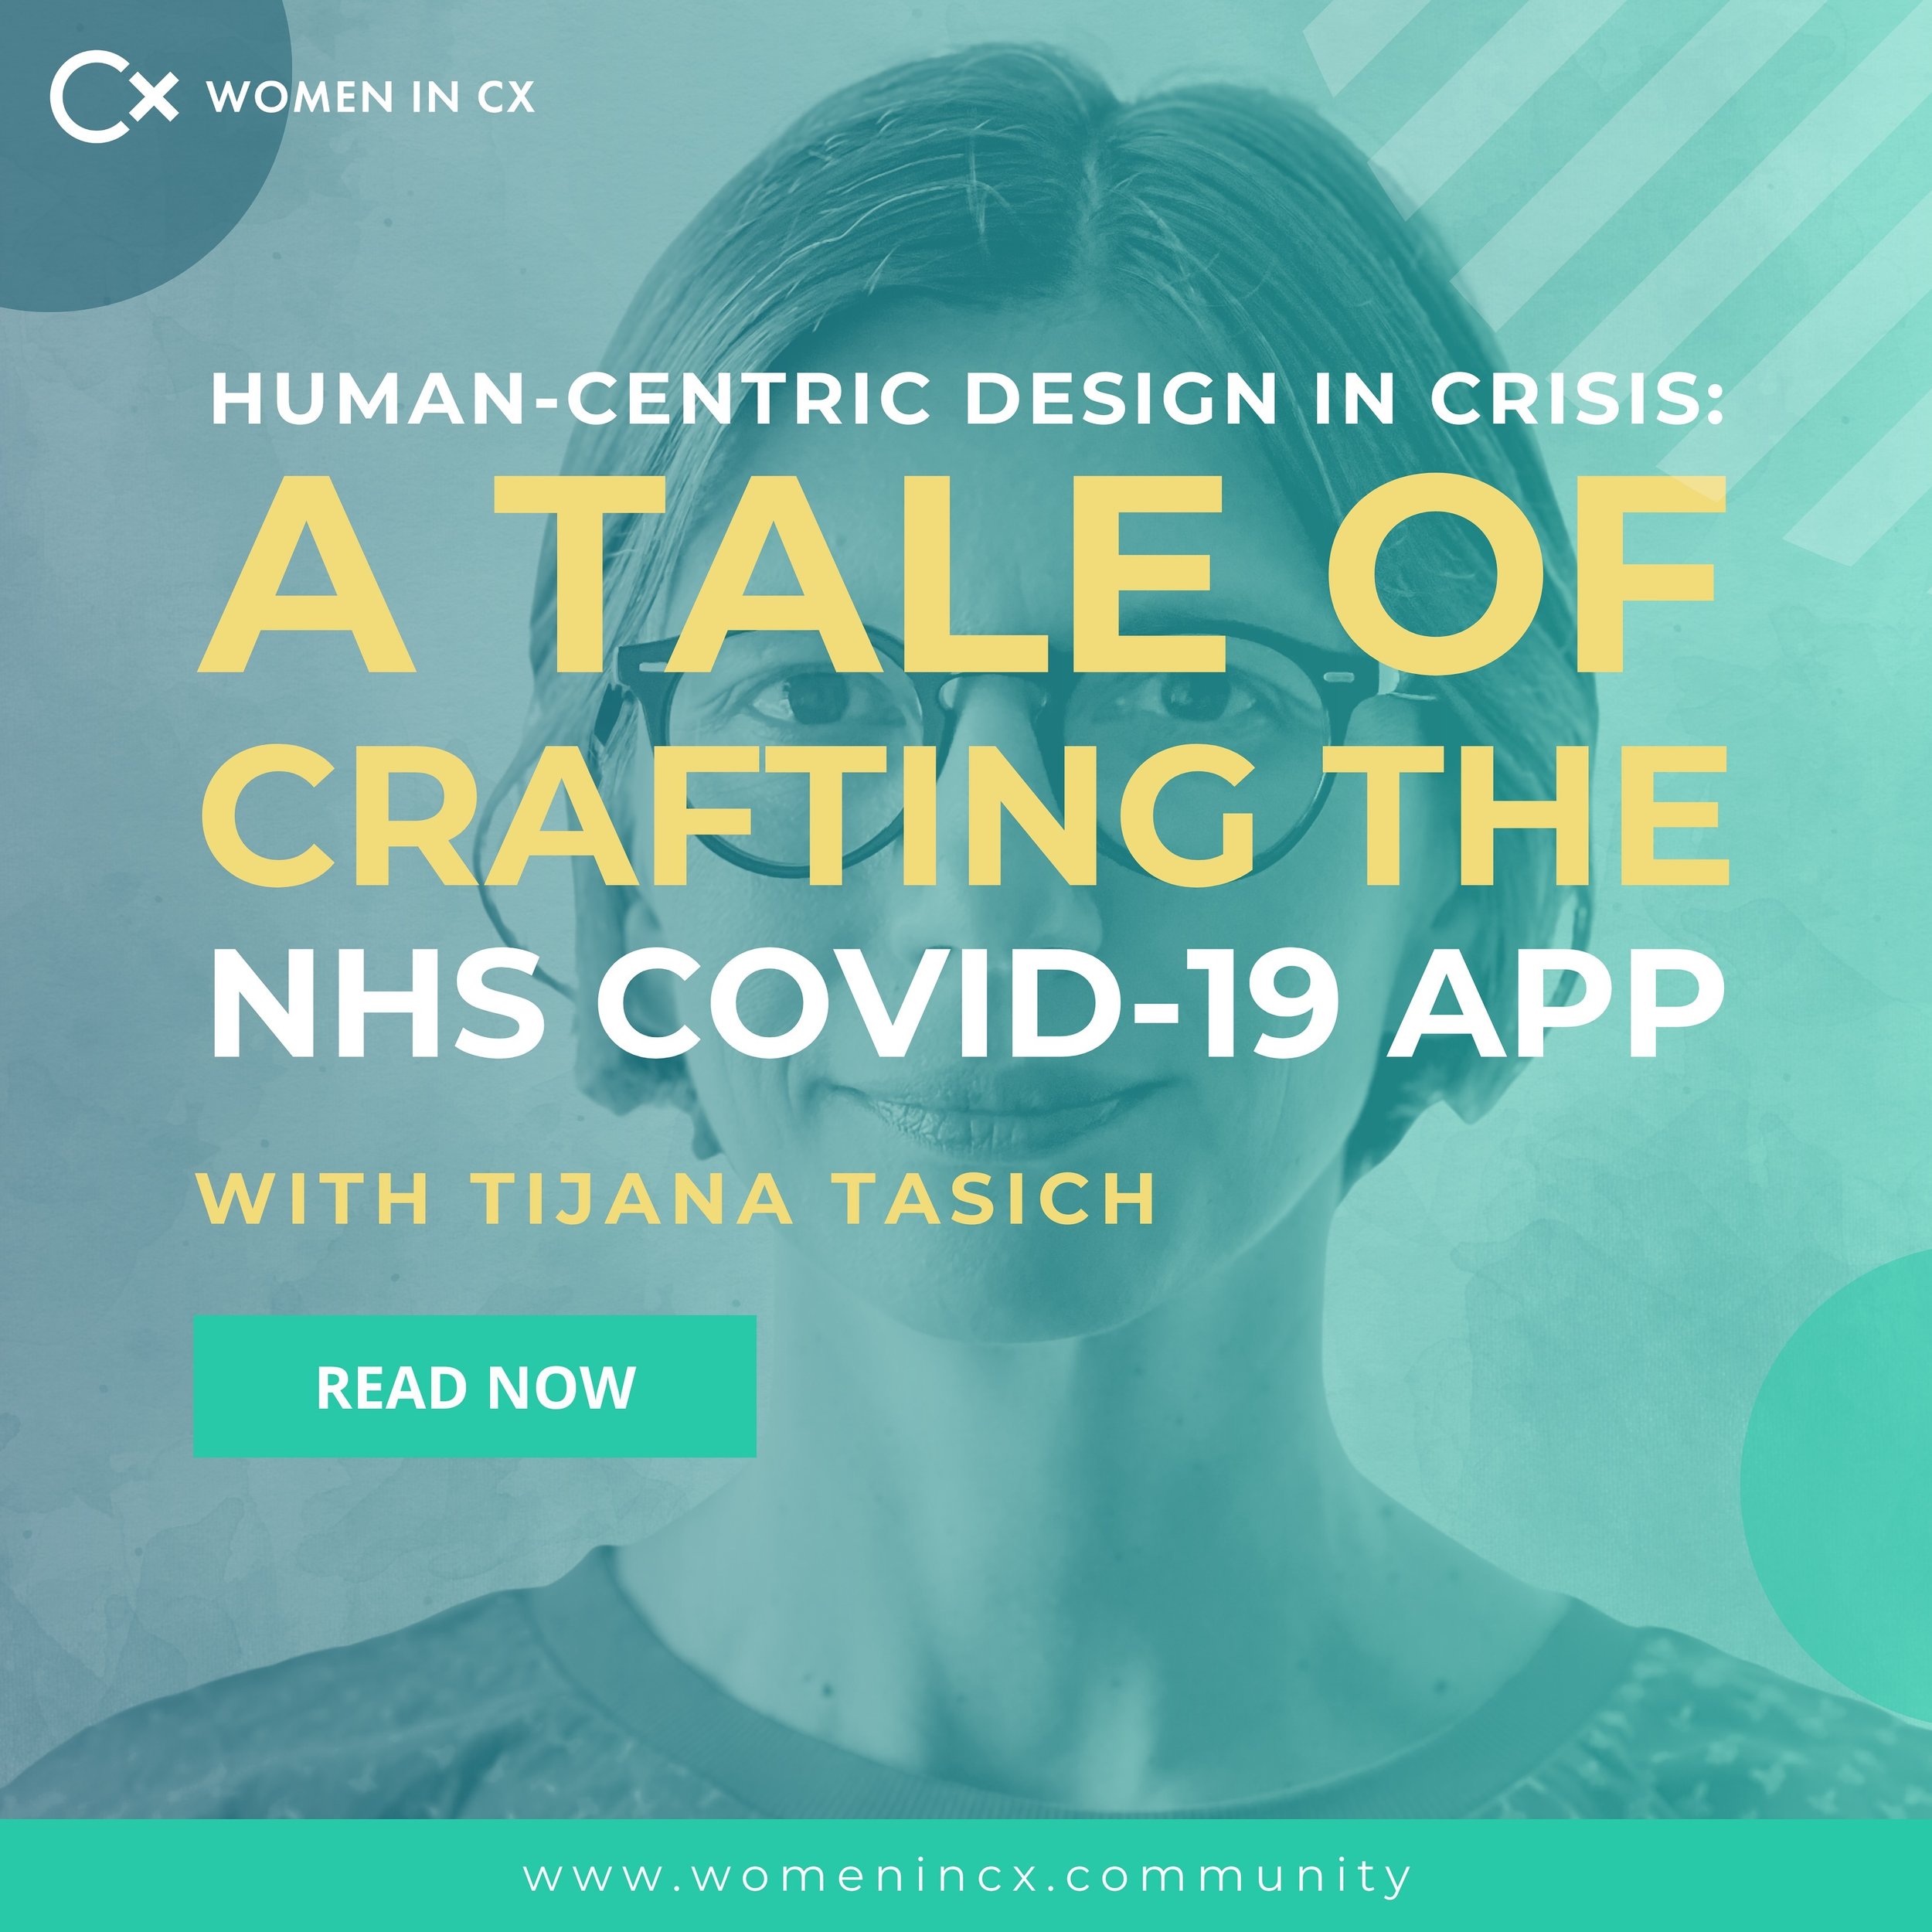 &ldquo;The end of the world as we know it.&rdquo;
&nbsp;
Taking us back to 2020, a time when our lives were turned upside down by the rapid spread of COVID-19, in her recent case study, Tijana Tasich, the former NHS COVID-19 app&rsquo;s Experience De